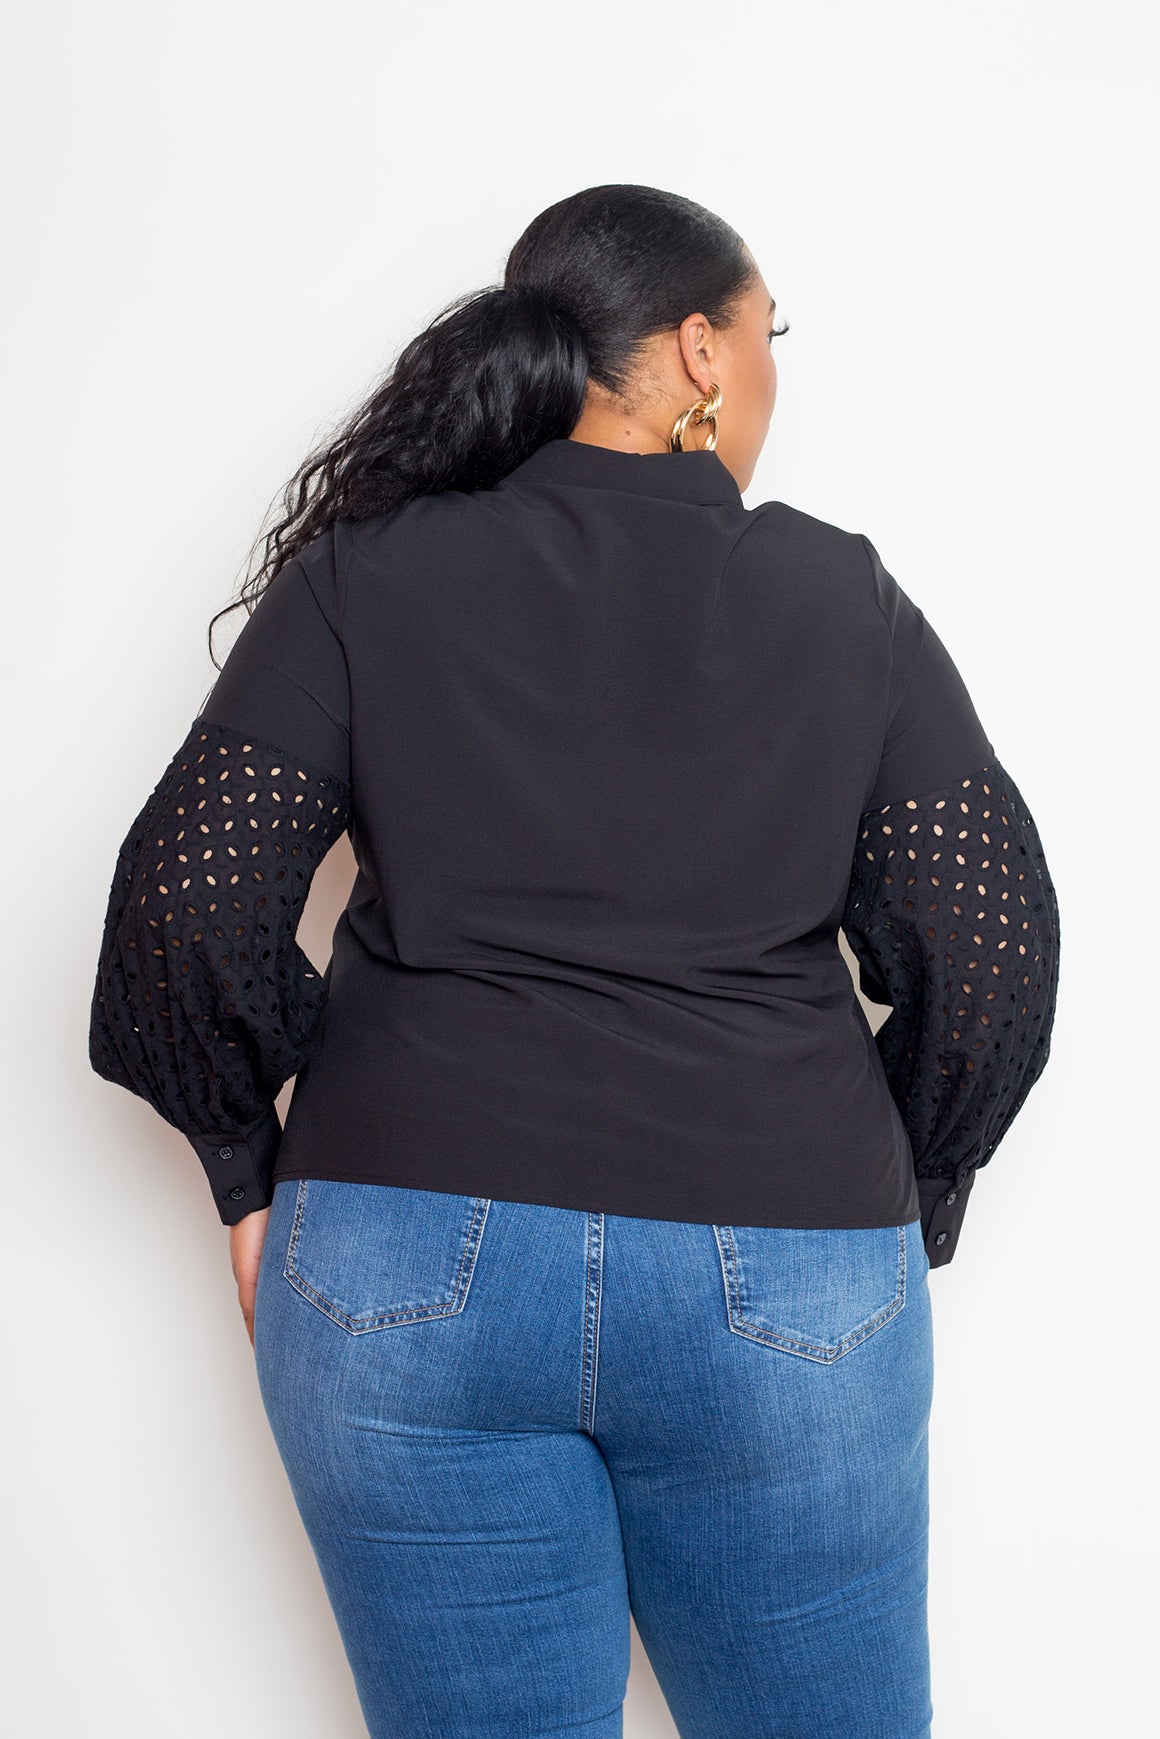 Blouse With Punched Sleeves | Black, PLUS SIZE, PLUS SIZE TOPS, SALE, SALE PLUS SIZE, White | Style Your Curves